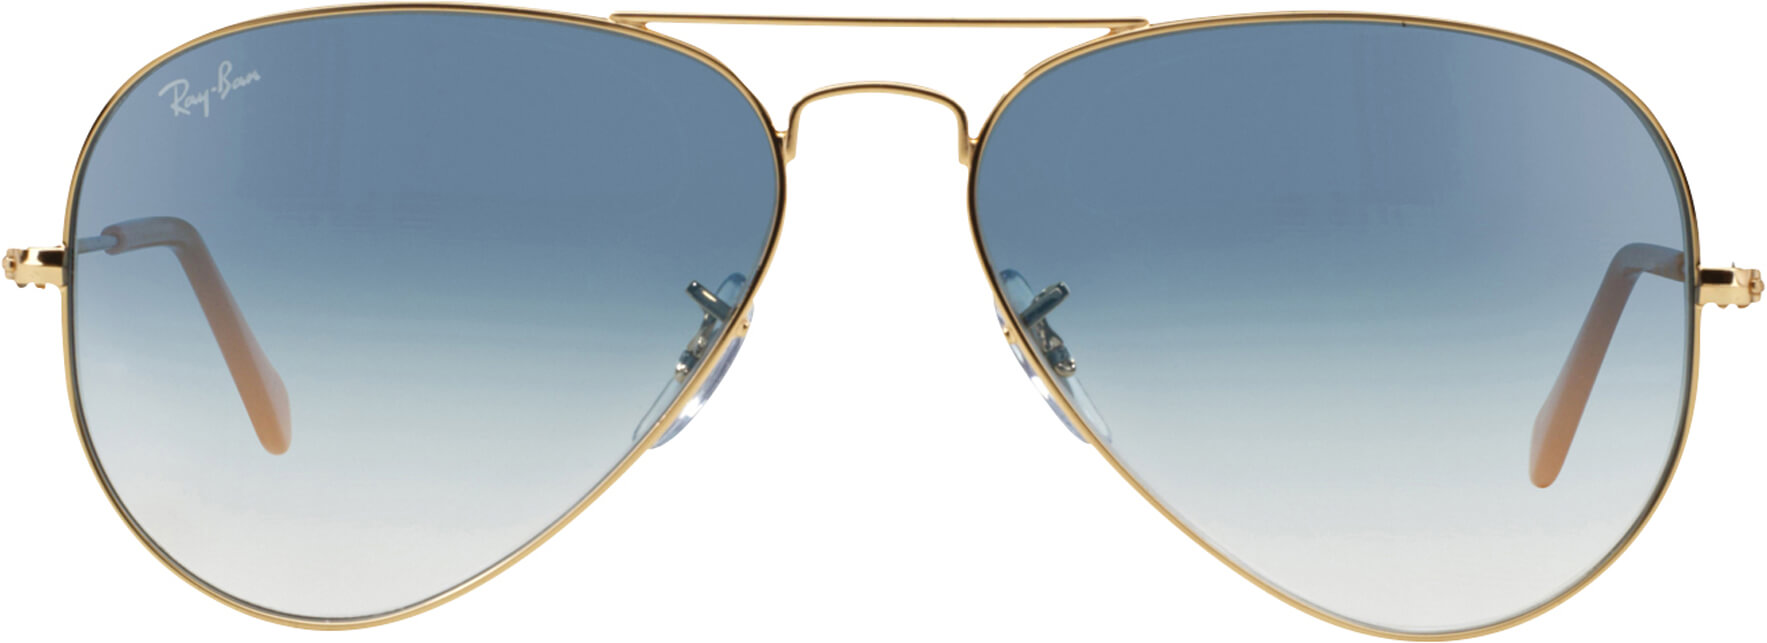 Ray-Ban AVIATOR 3025 image number null